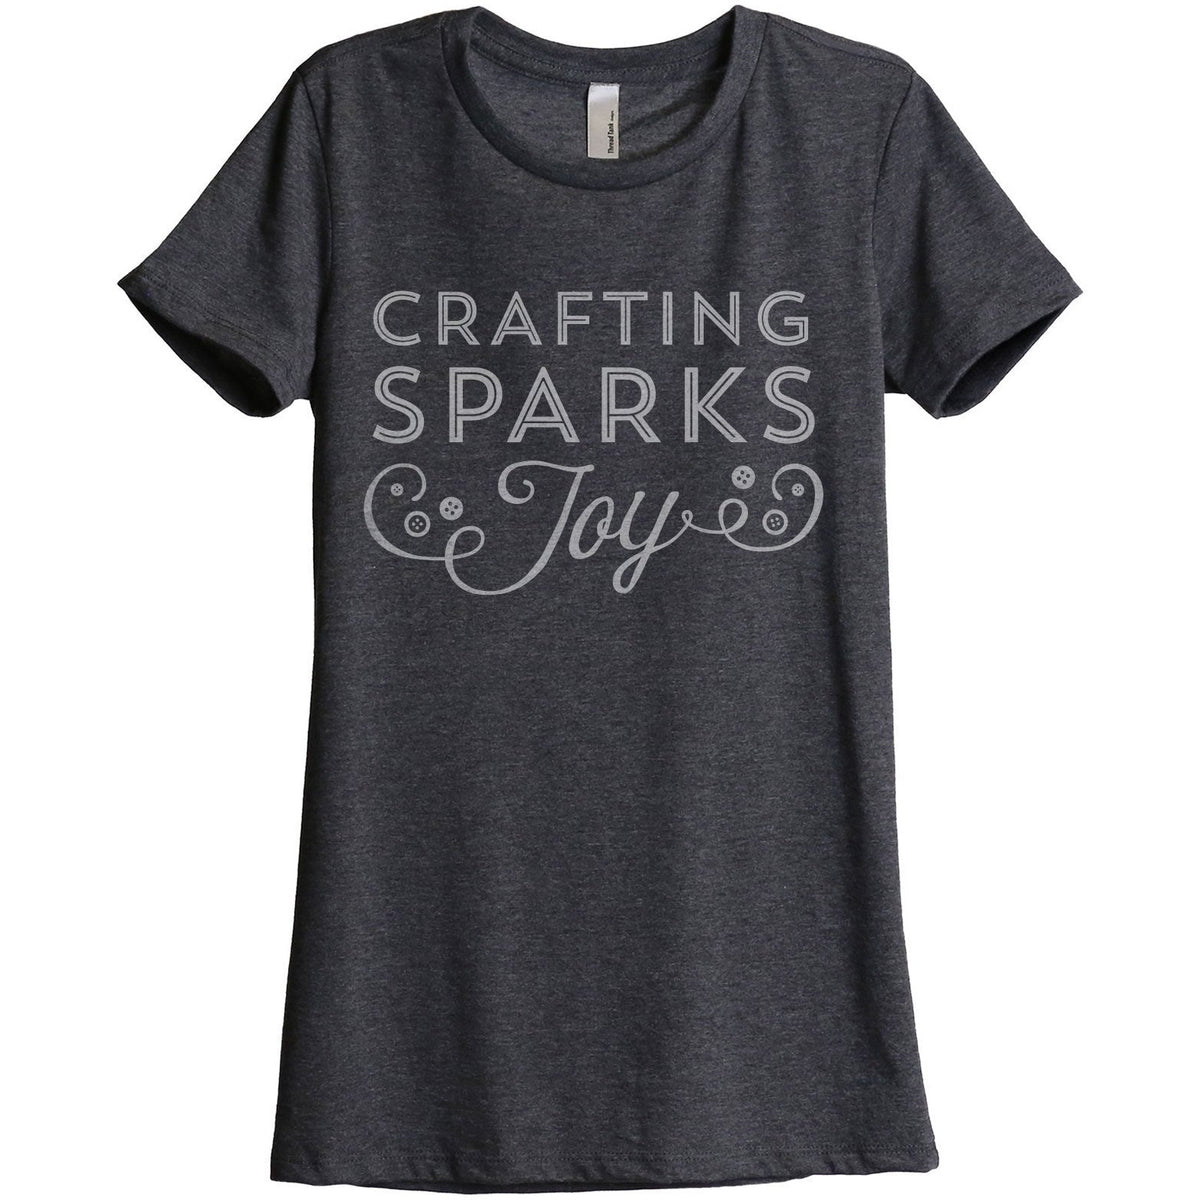 Crafting Sparks Joy Women's Relaxed Crewneck Graphic T-Shirt Top Tee ...